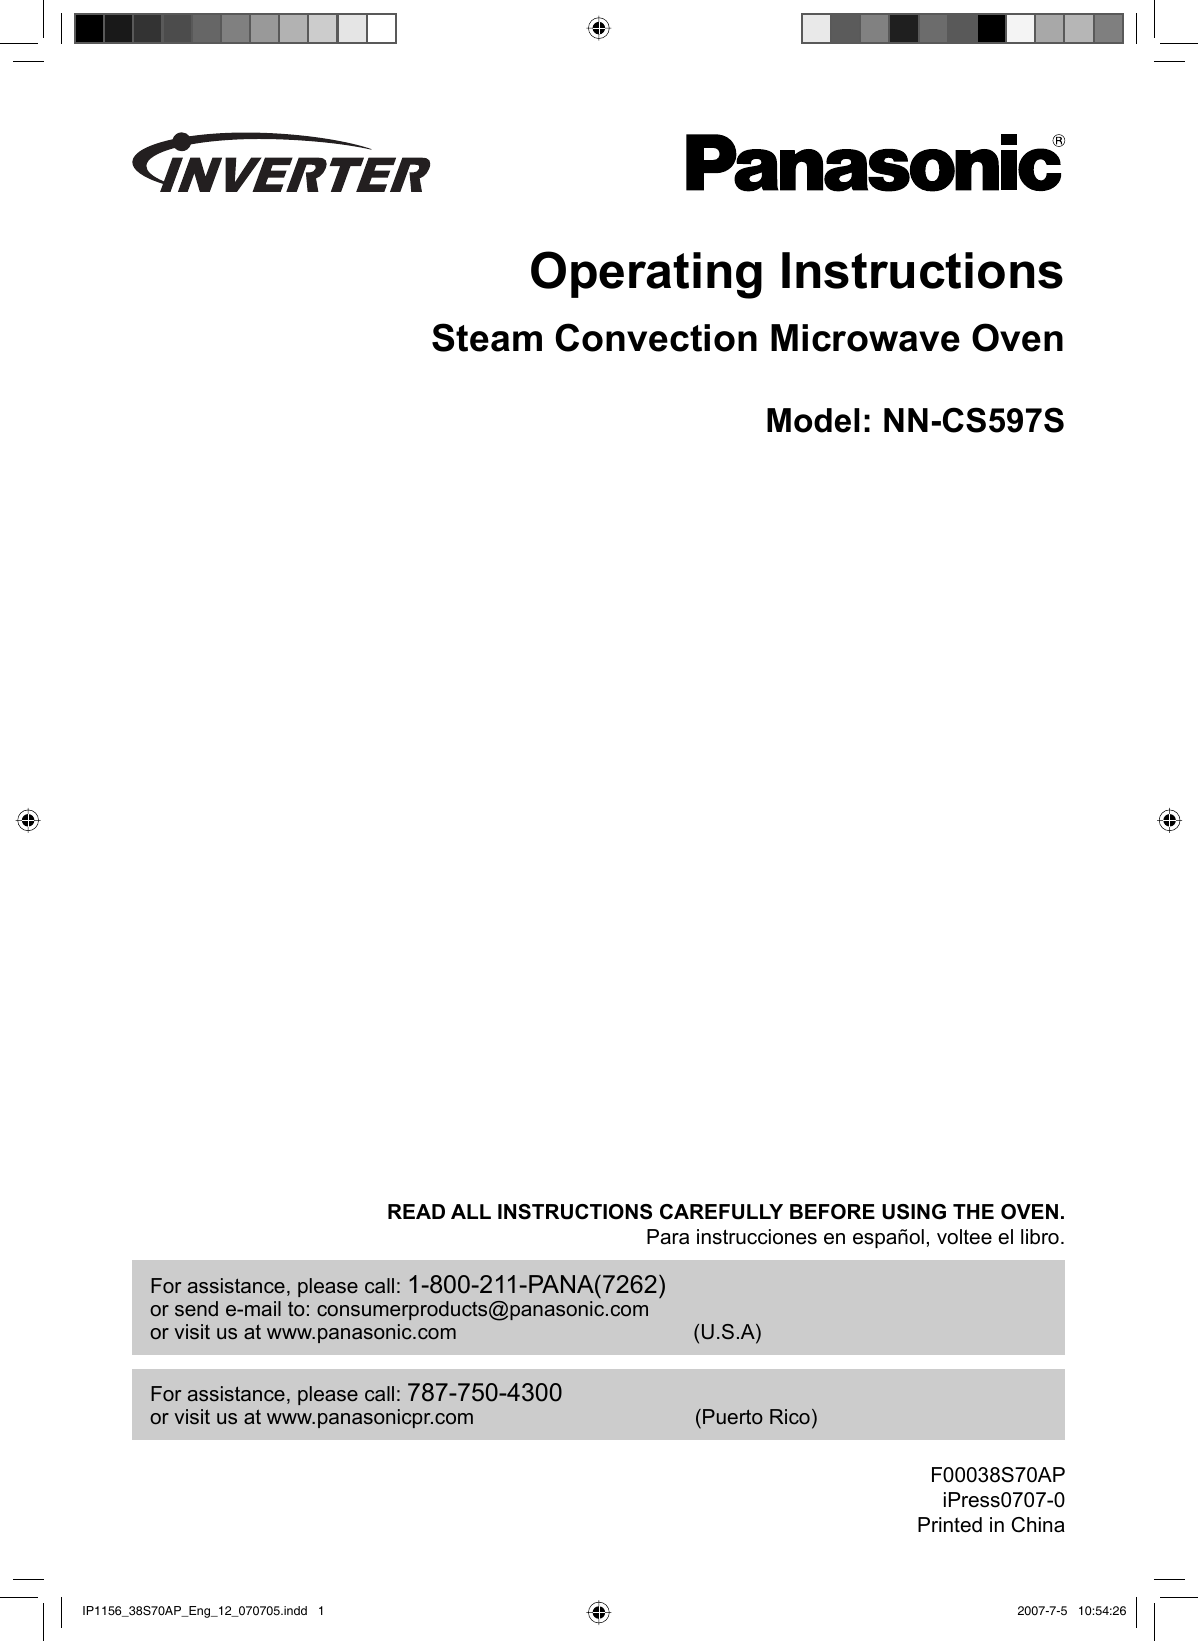 Operating InstructionsSteam Convection Microwave OvenModel: NN-CS597SREAD ALL INSTRUCTIONS CAREFULLY BEFORE USING THE OVEN.Para instrucciones en español, voltee el libro.For assistance, please call: 1-800-211-PANA(7262)or send e-mail to: consumerproducts@panasonic.comor visit us at www.panasonic.com  (U.S.A)For assistance, please call: 787-750-4300or visit us at www.panasonicpr.com  (Puerto Rico)F00038S70APiPress0707-0Printed in ChinaIP1156_38S70AP_Eng_12_070705.indd   1IP1156_38S70AP_Eng_12_070705.indd   1 2007-7-5   10:54:262007-7-5   10:54:26